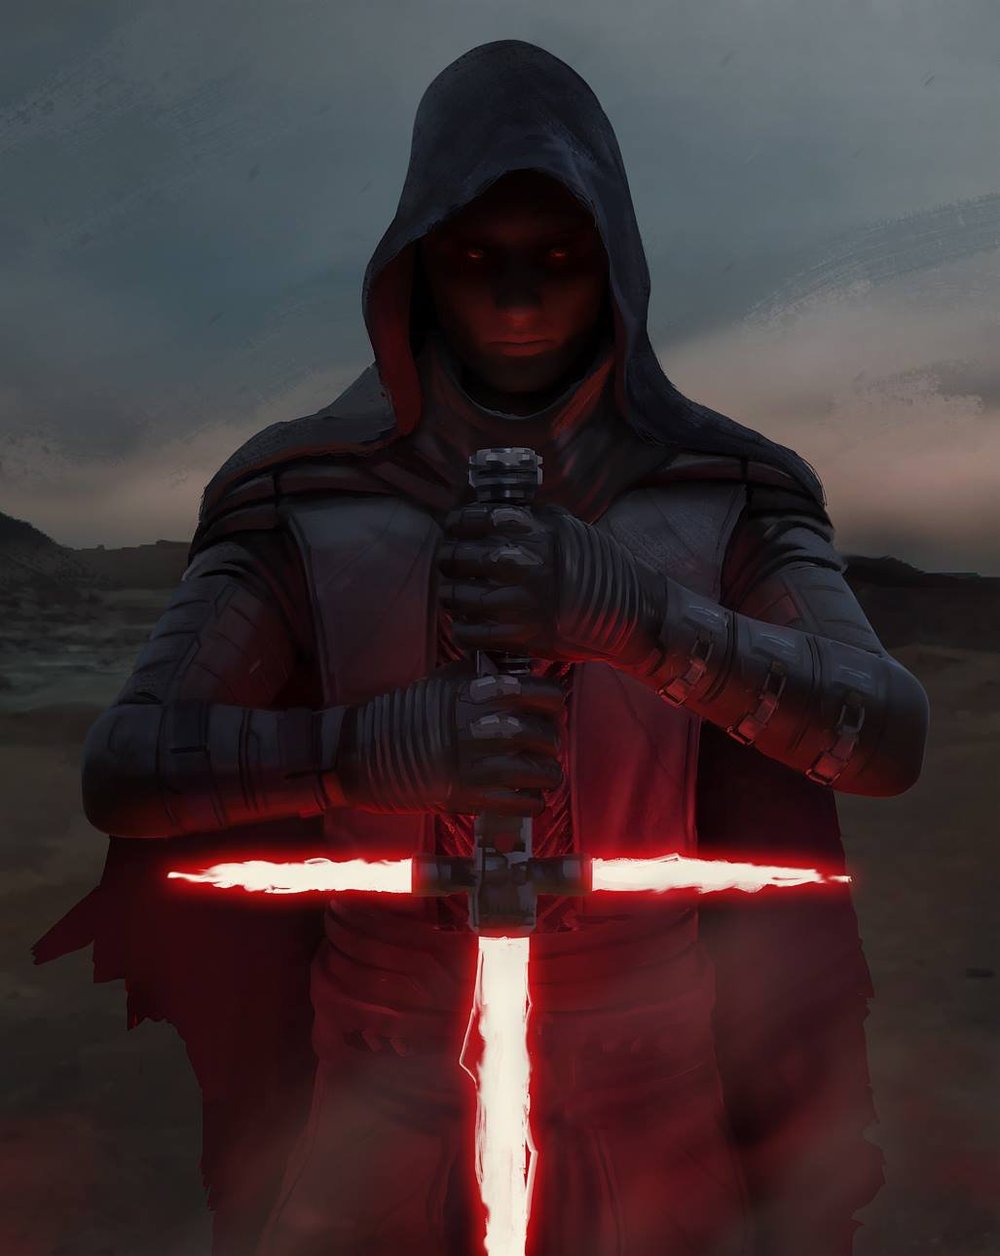 Sith Lord Fan Art for STAR WARS THE FORCE AWAKENS